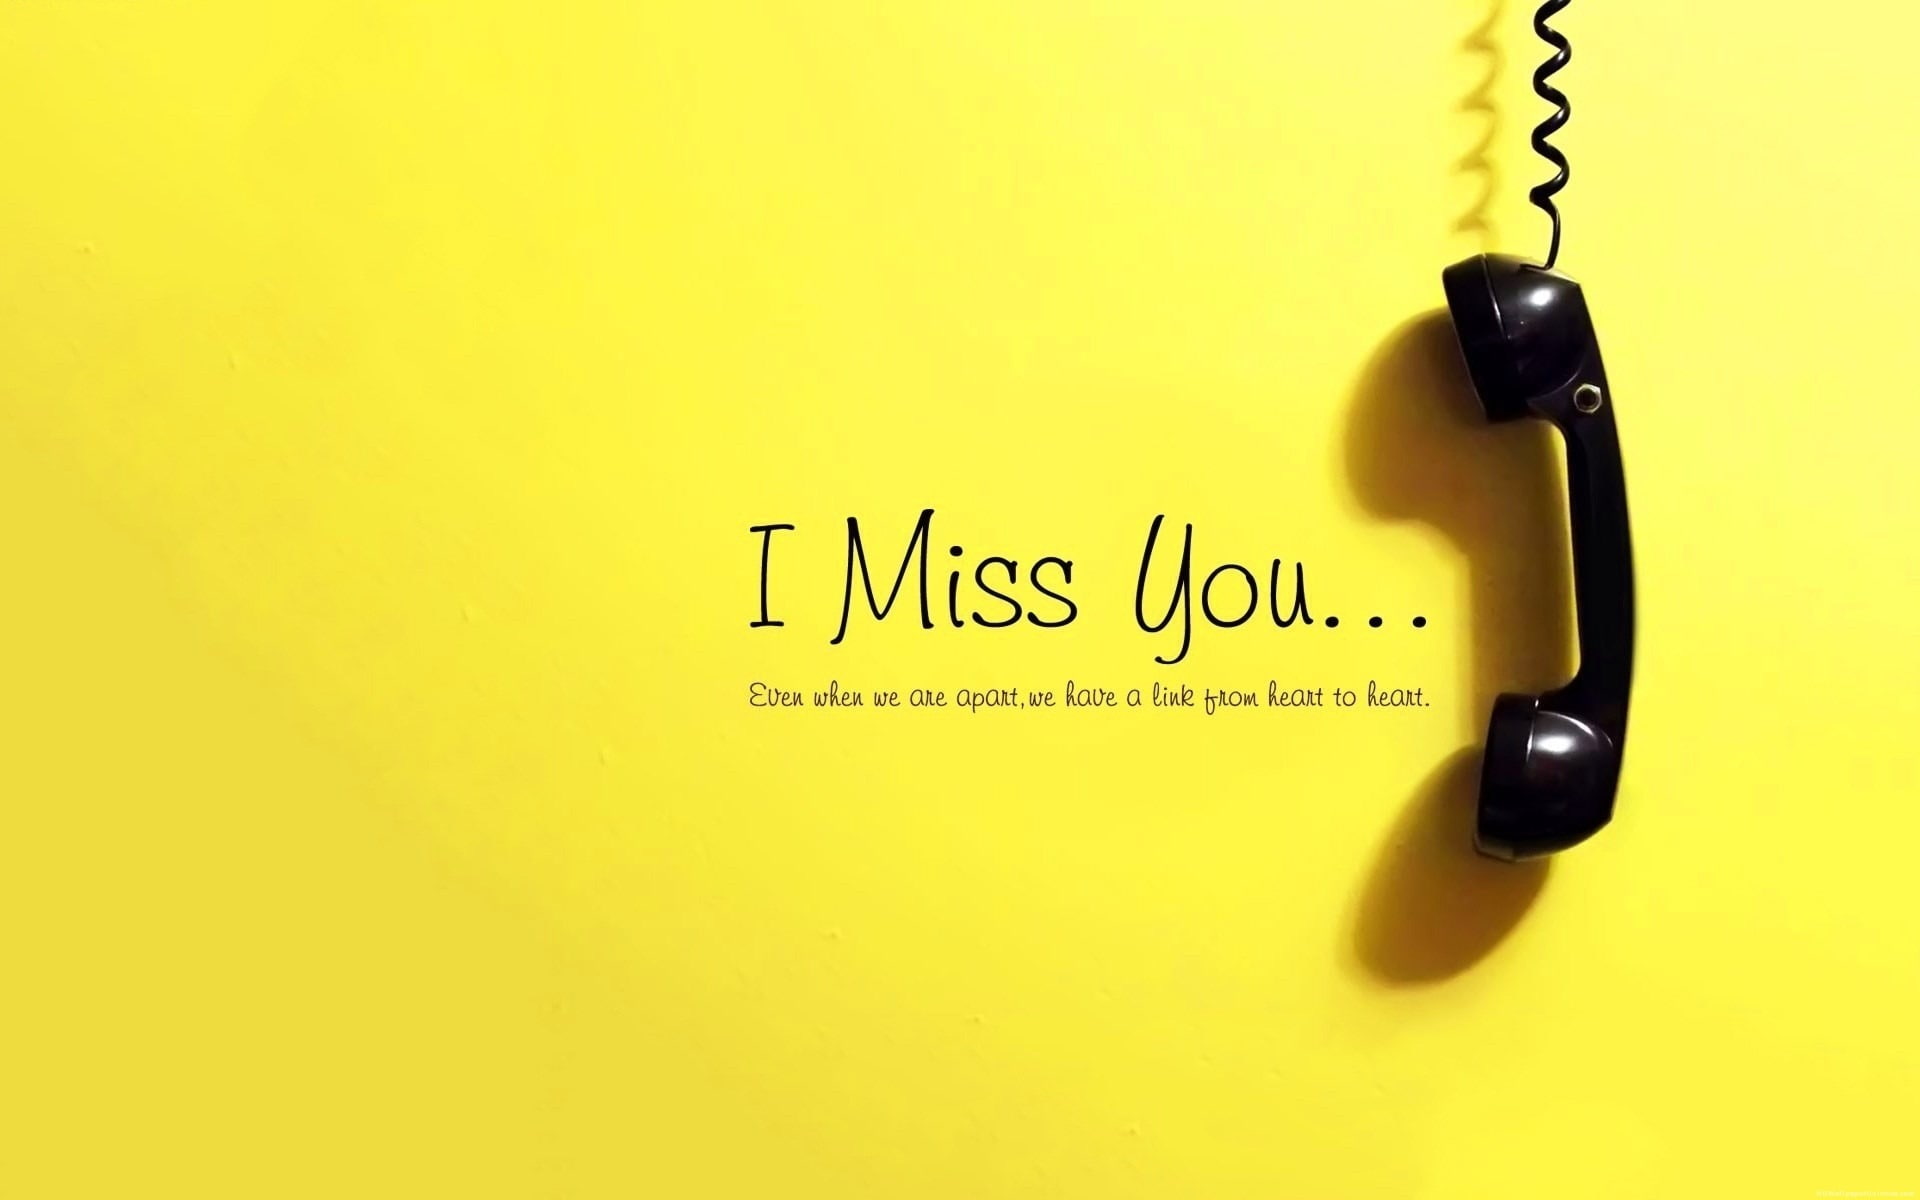 i miss you-high quality Wallpapers, black handset with i miss you text overlay